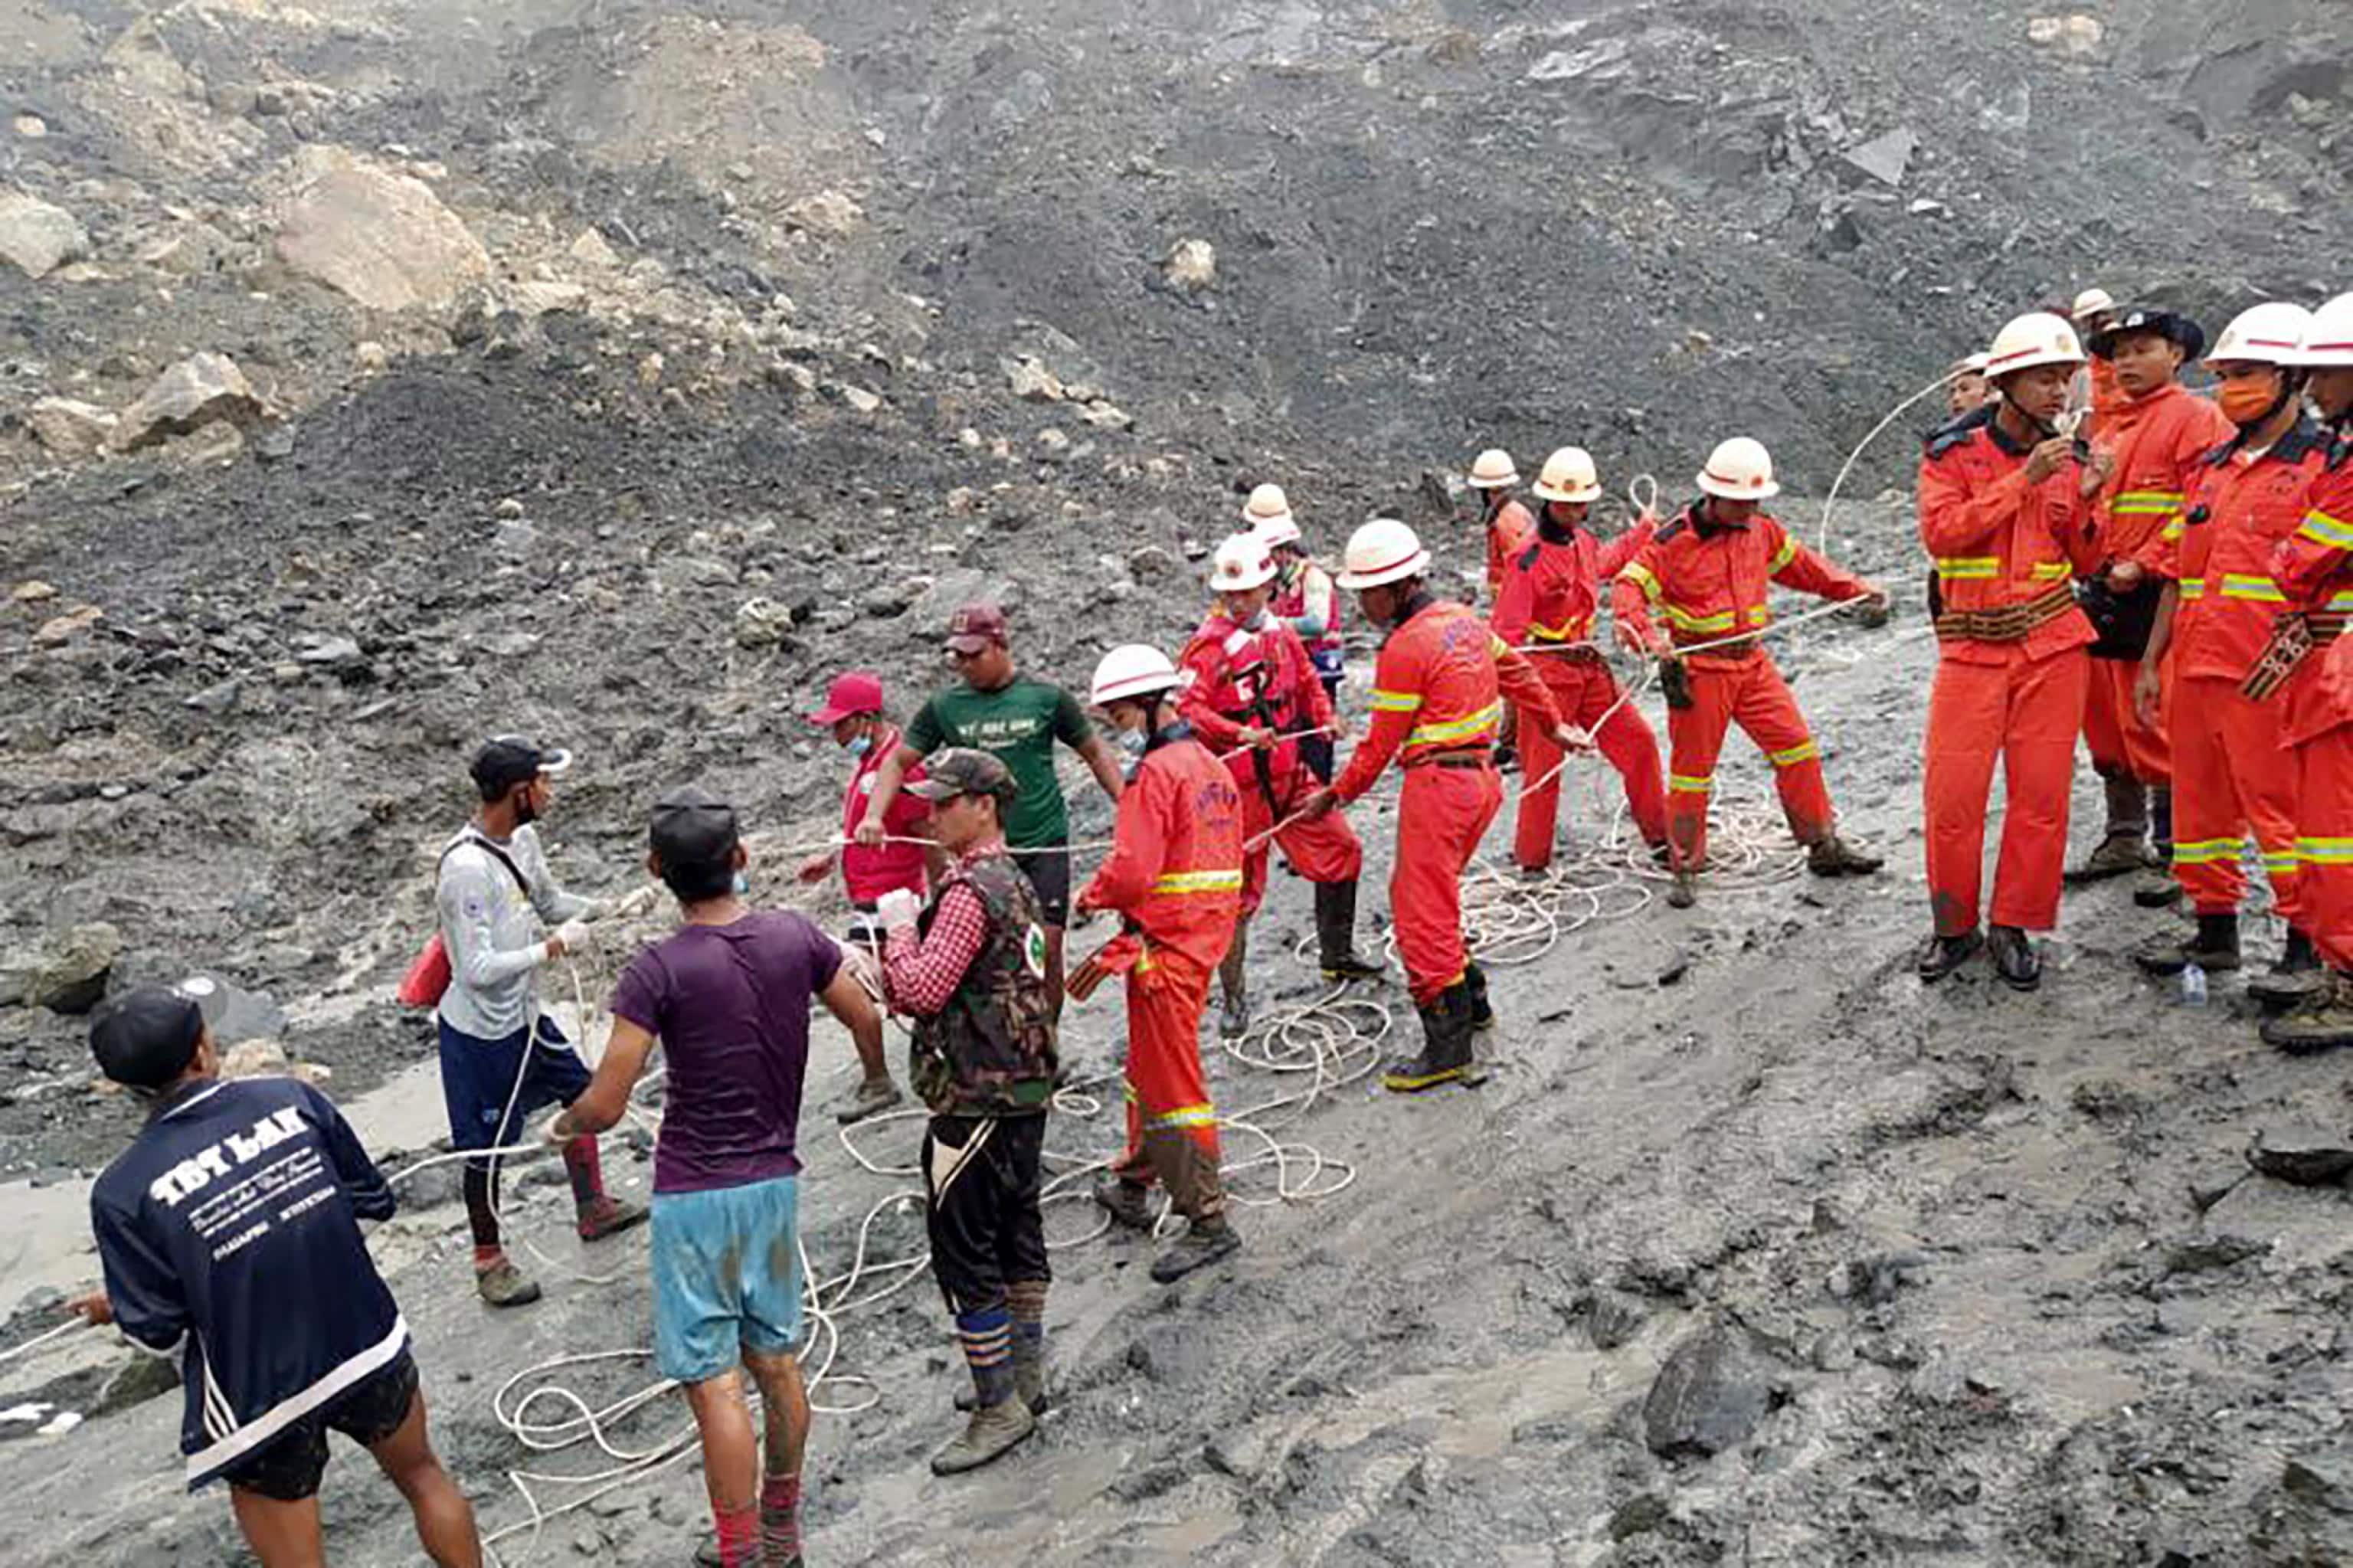 epa08522223 A handout photo made available by the Myanmar Fire Services Department shows rescue workers searching for people after a landslide accident at a jade mining site in Hpakant, Kachin State, Myanmar, 02 July 2020. According media reports, search and rescue efforts are ongoing after a landslide was triggered by heavy rain in the area.  EPA/Myanmar Fire Services Department HANDOUT  HANDOUT EDITORIAL USE ONLY/NO SALES